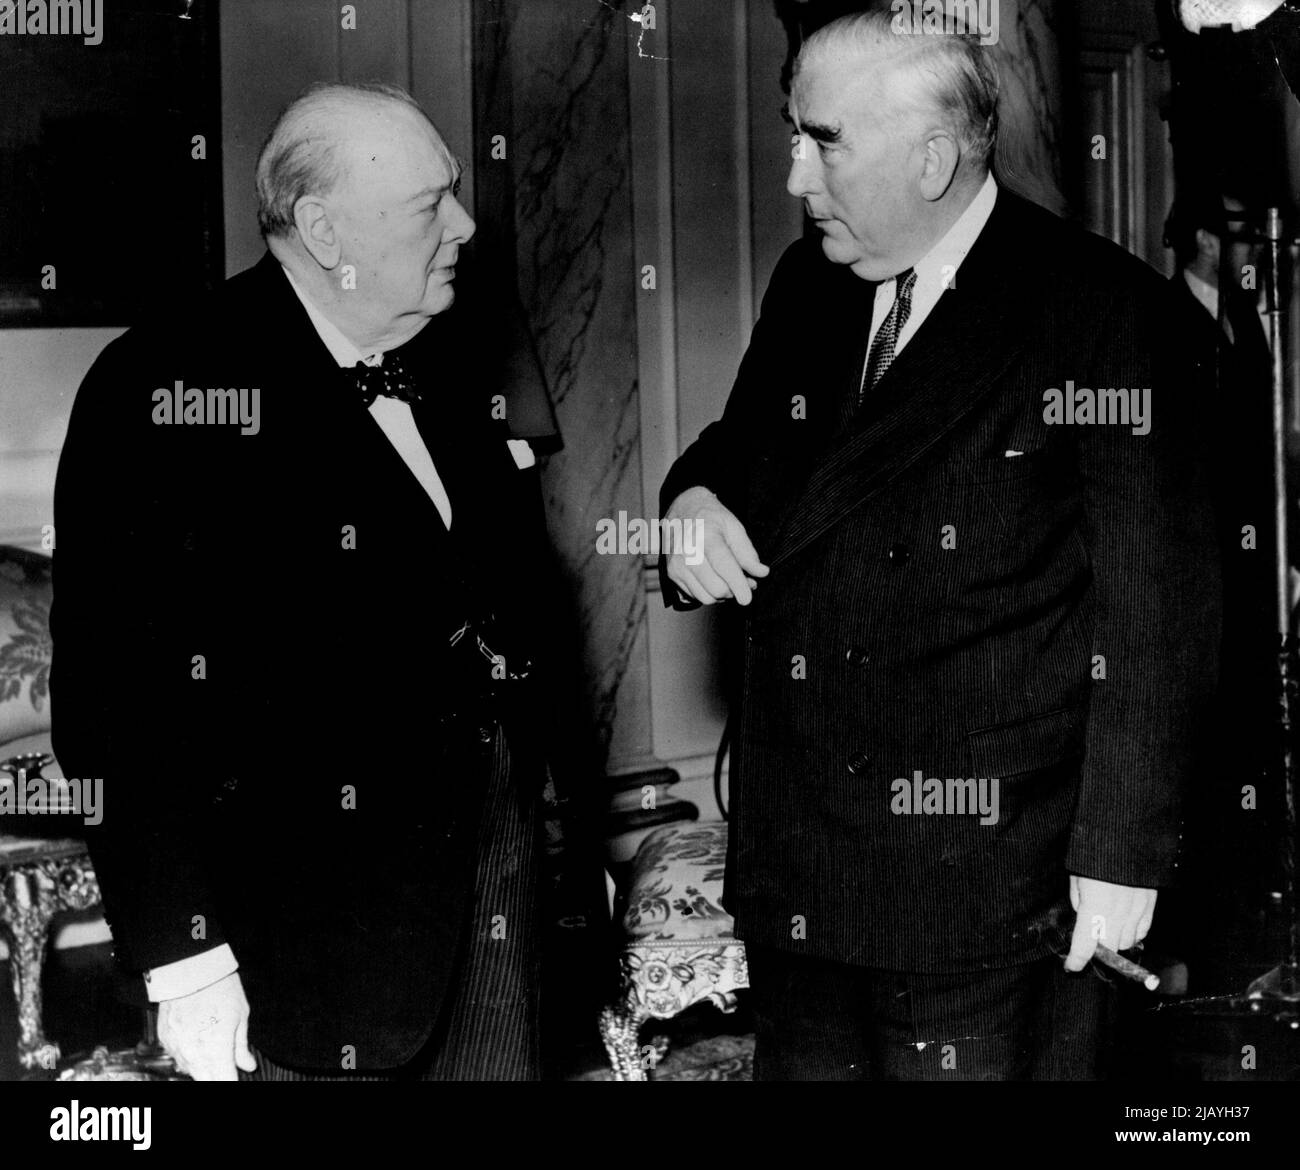 Commonwealth Prime Ministers Conference : Sir Winston Churchill talking to Mr. R.G. Menzies, the Australian Prime Minister at No. 10. Downing Street this afternoon. Sir Winston Churchill presided at the first meeting of the Commonwealth Conference of Prime Ministers which opened in London no. 10. Downing Street this afternoon. The conference which is expected to last nine days, will almost certainly discuss the present crisis in the far east. January 31, 1955. (Photo by Paul Popper, Paul Popper Ltd.). Stock Photo